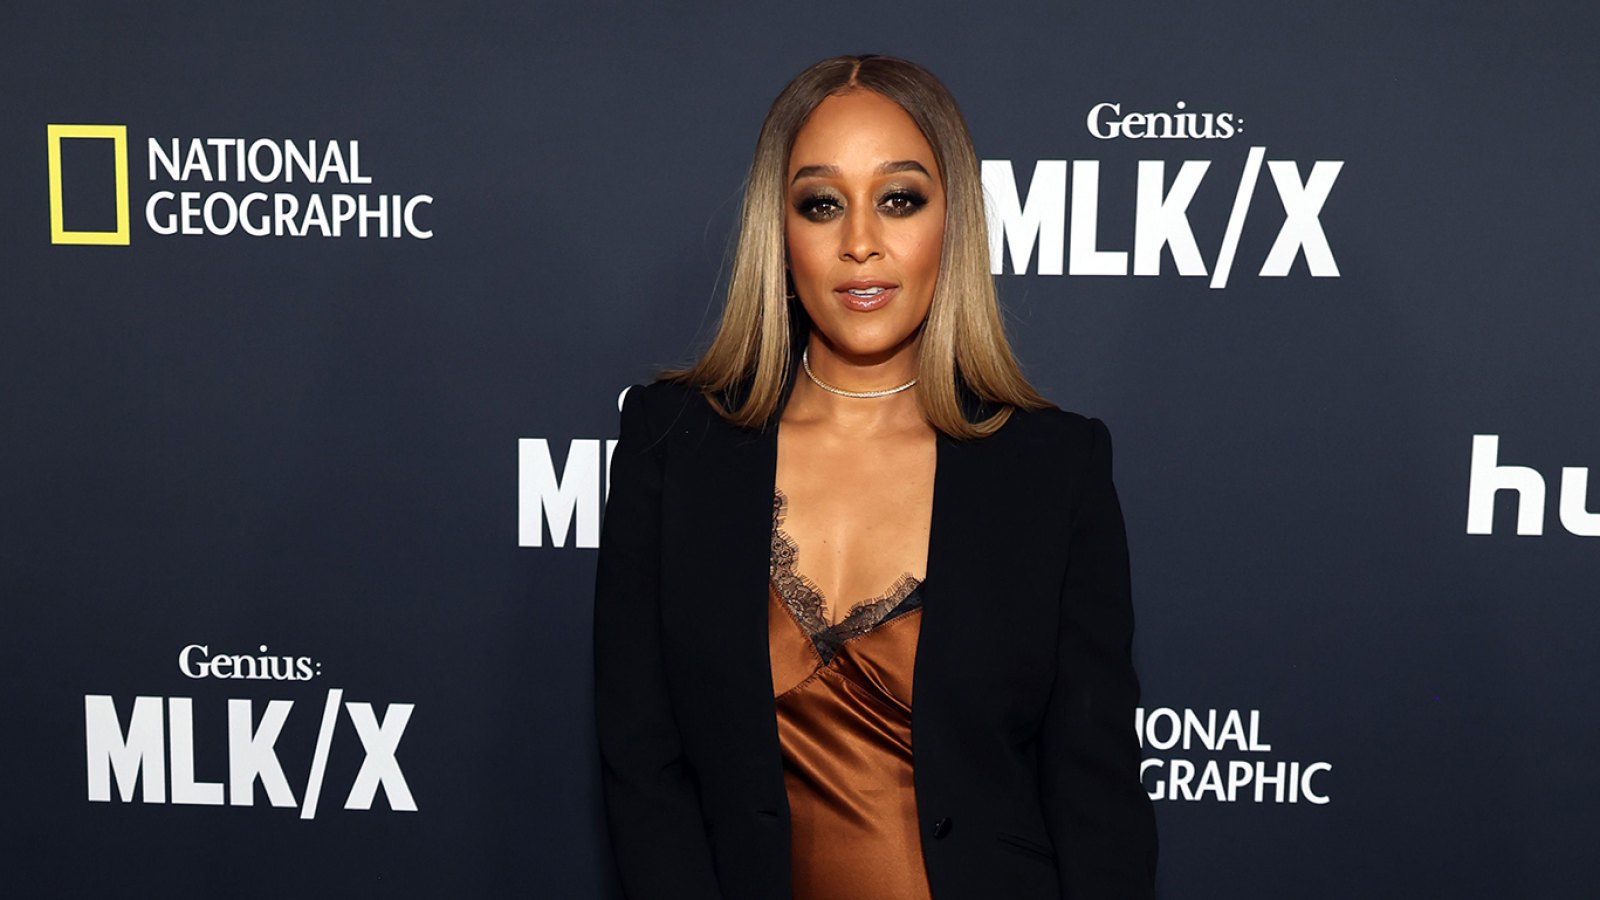 Tia Mowry at the premiere event for "Genius: MLK/X" in Beverly Hills on January 29, 2024.